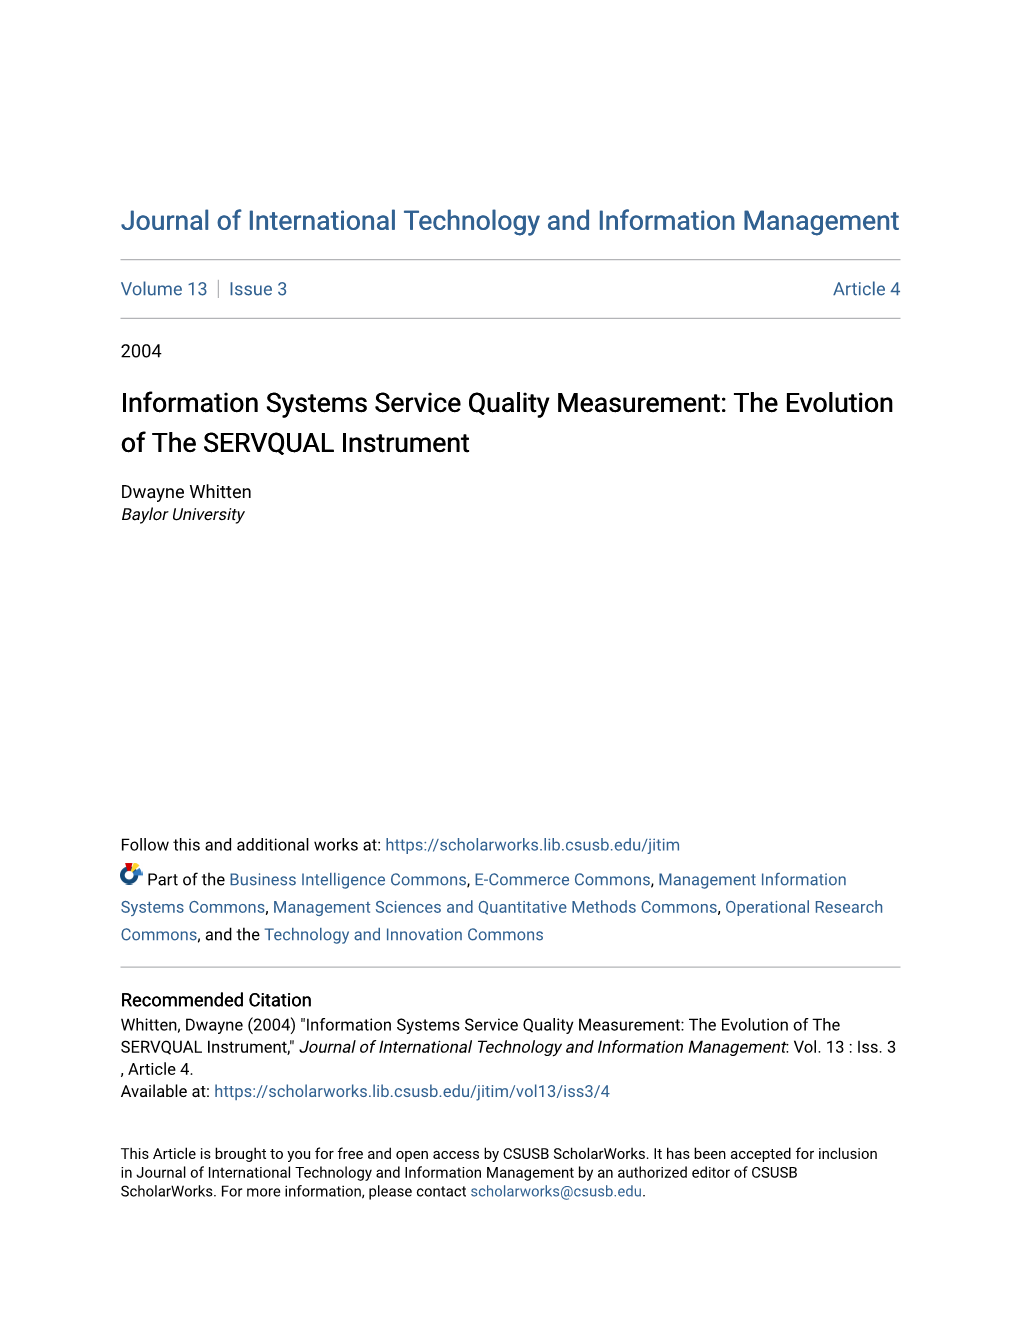 Information Systems Service Quality Measurement: the Evolution of the SERVQUAL Instrument